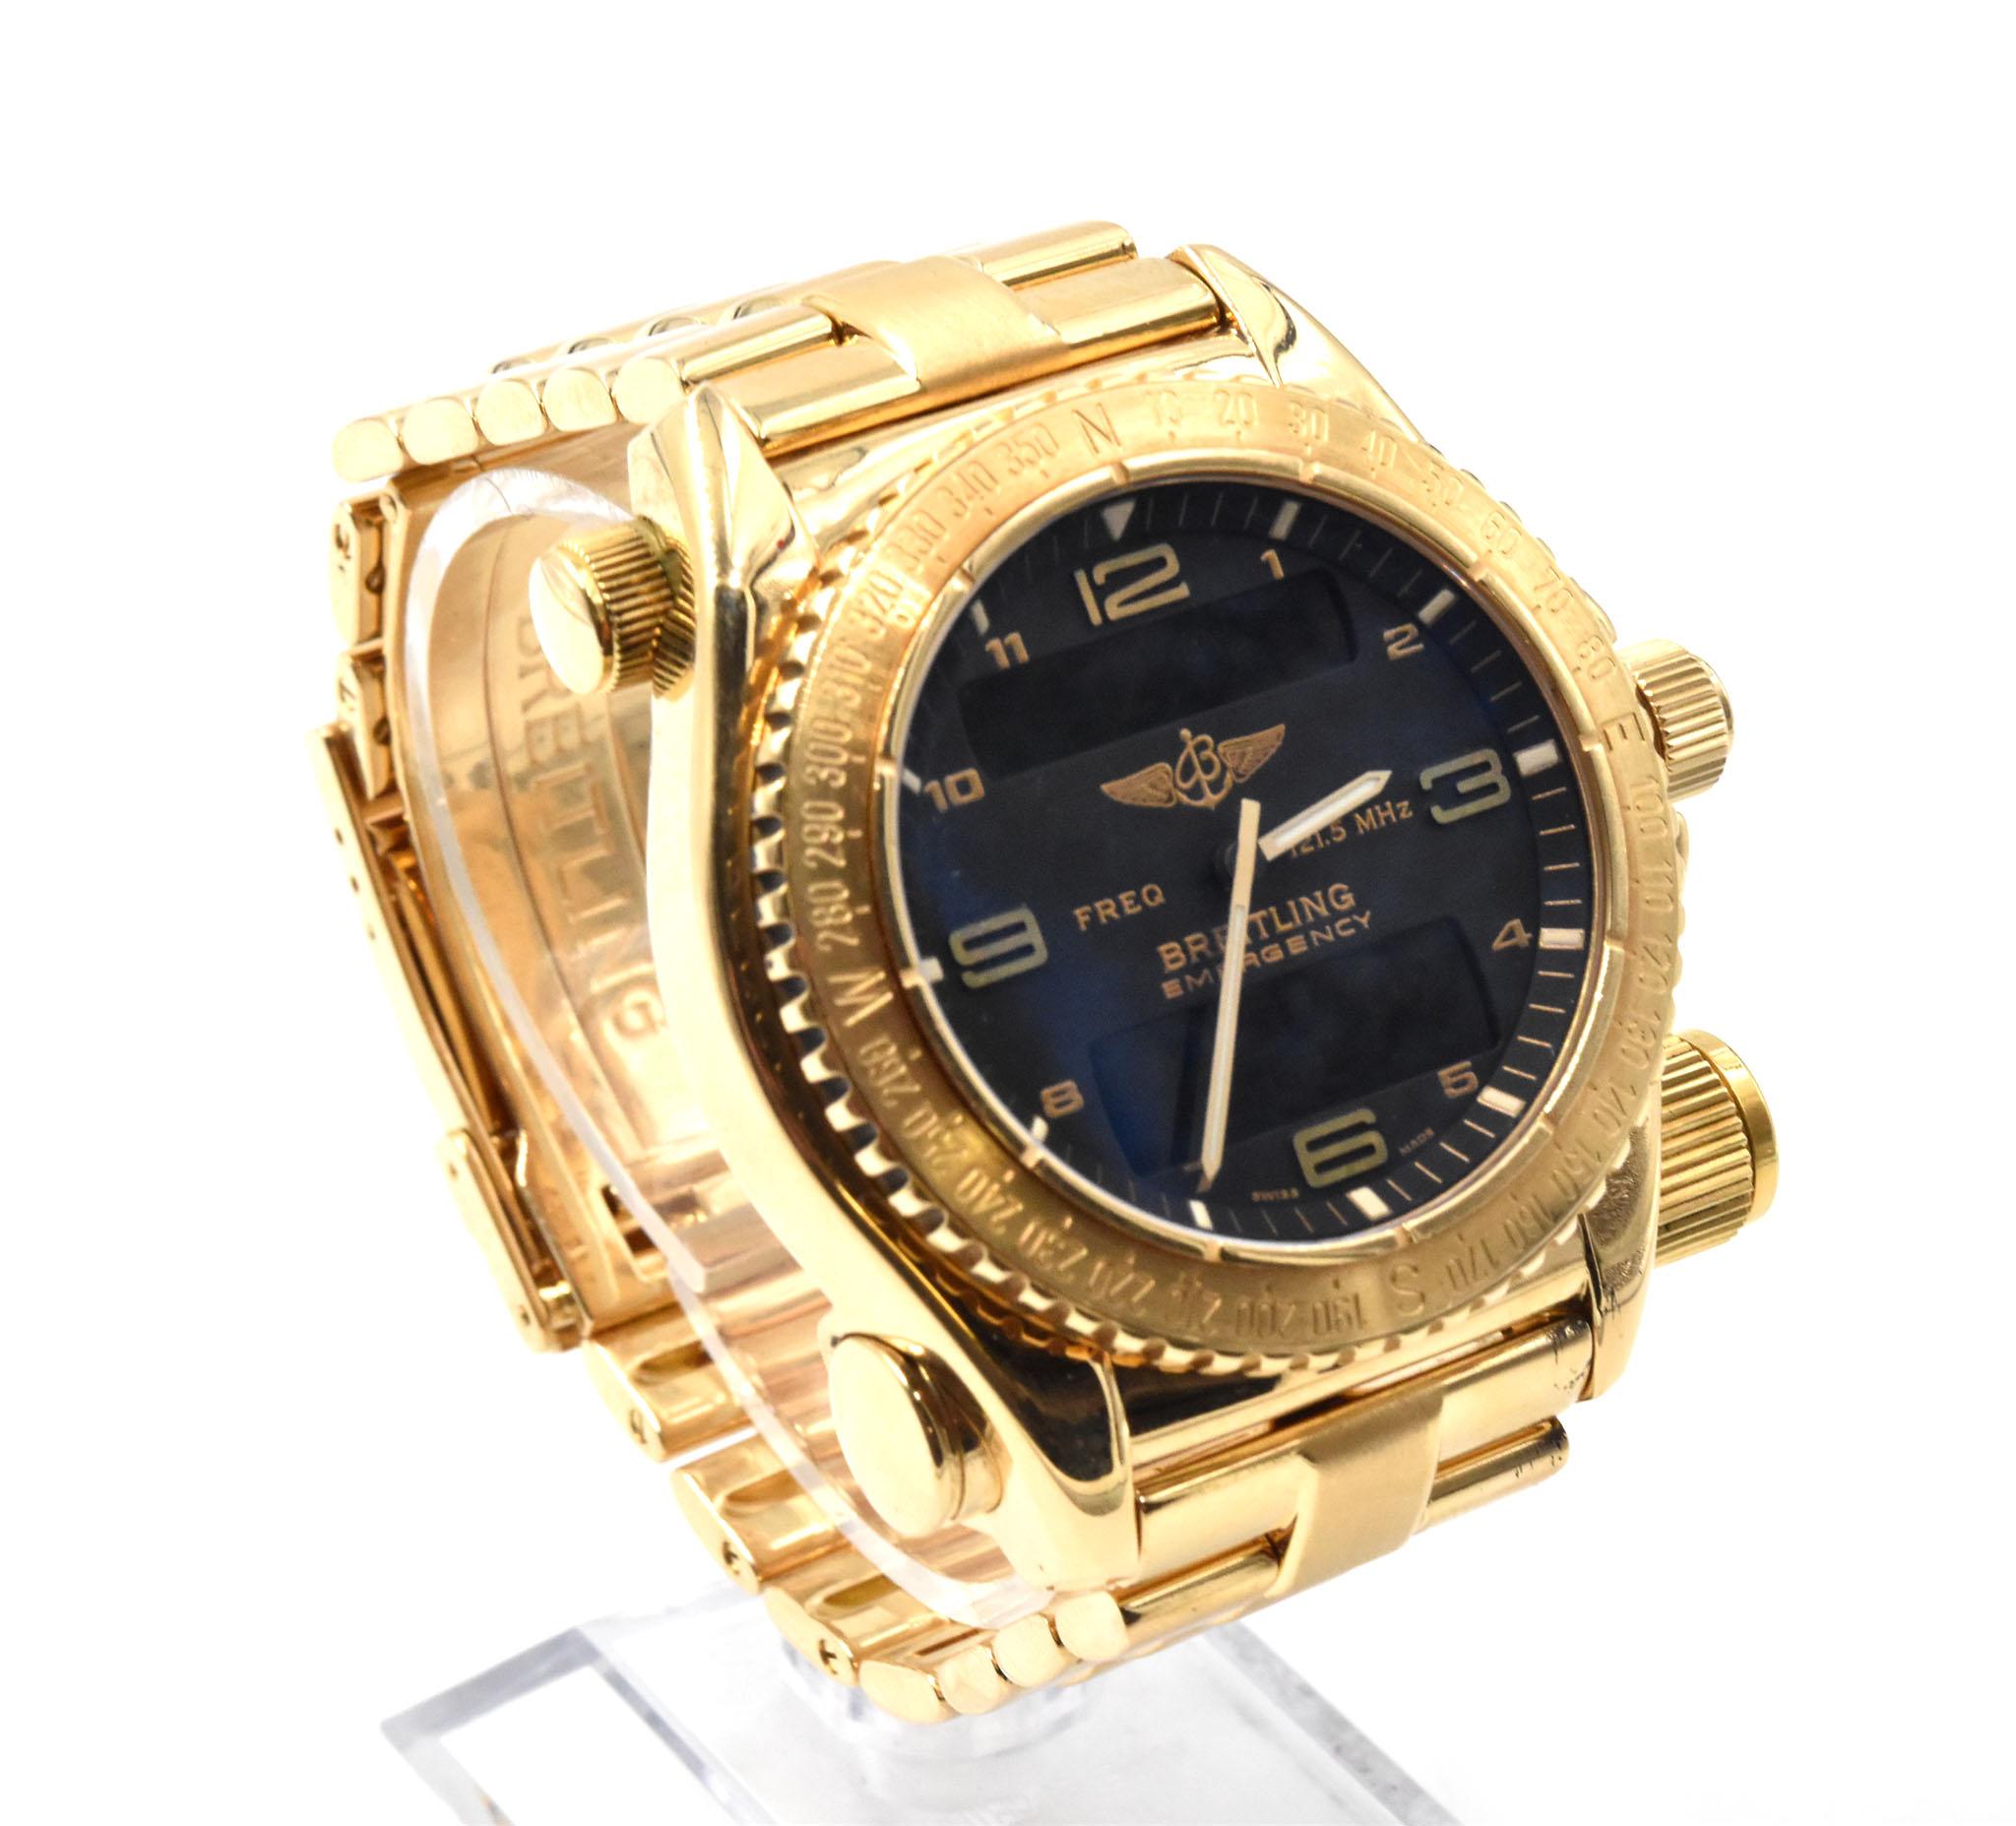 Movement: quartz 
Function: hours, minutes, seconds, LED interface functions
Case: 18k yellow gold 43mm case sapphire crystal, graduated bi-directional bezel, micro antennas between the lugs, case back with four screws and test button for the